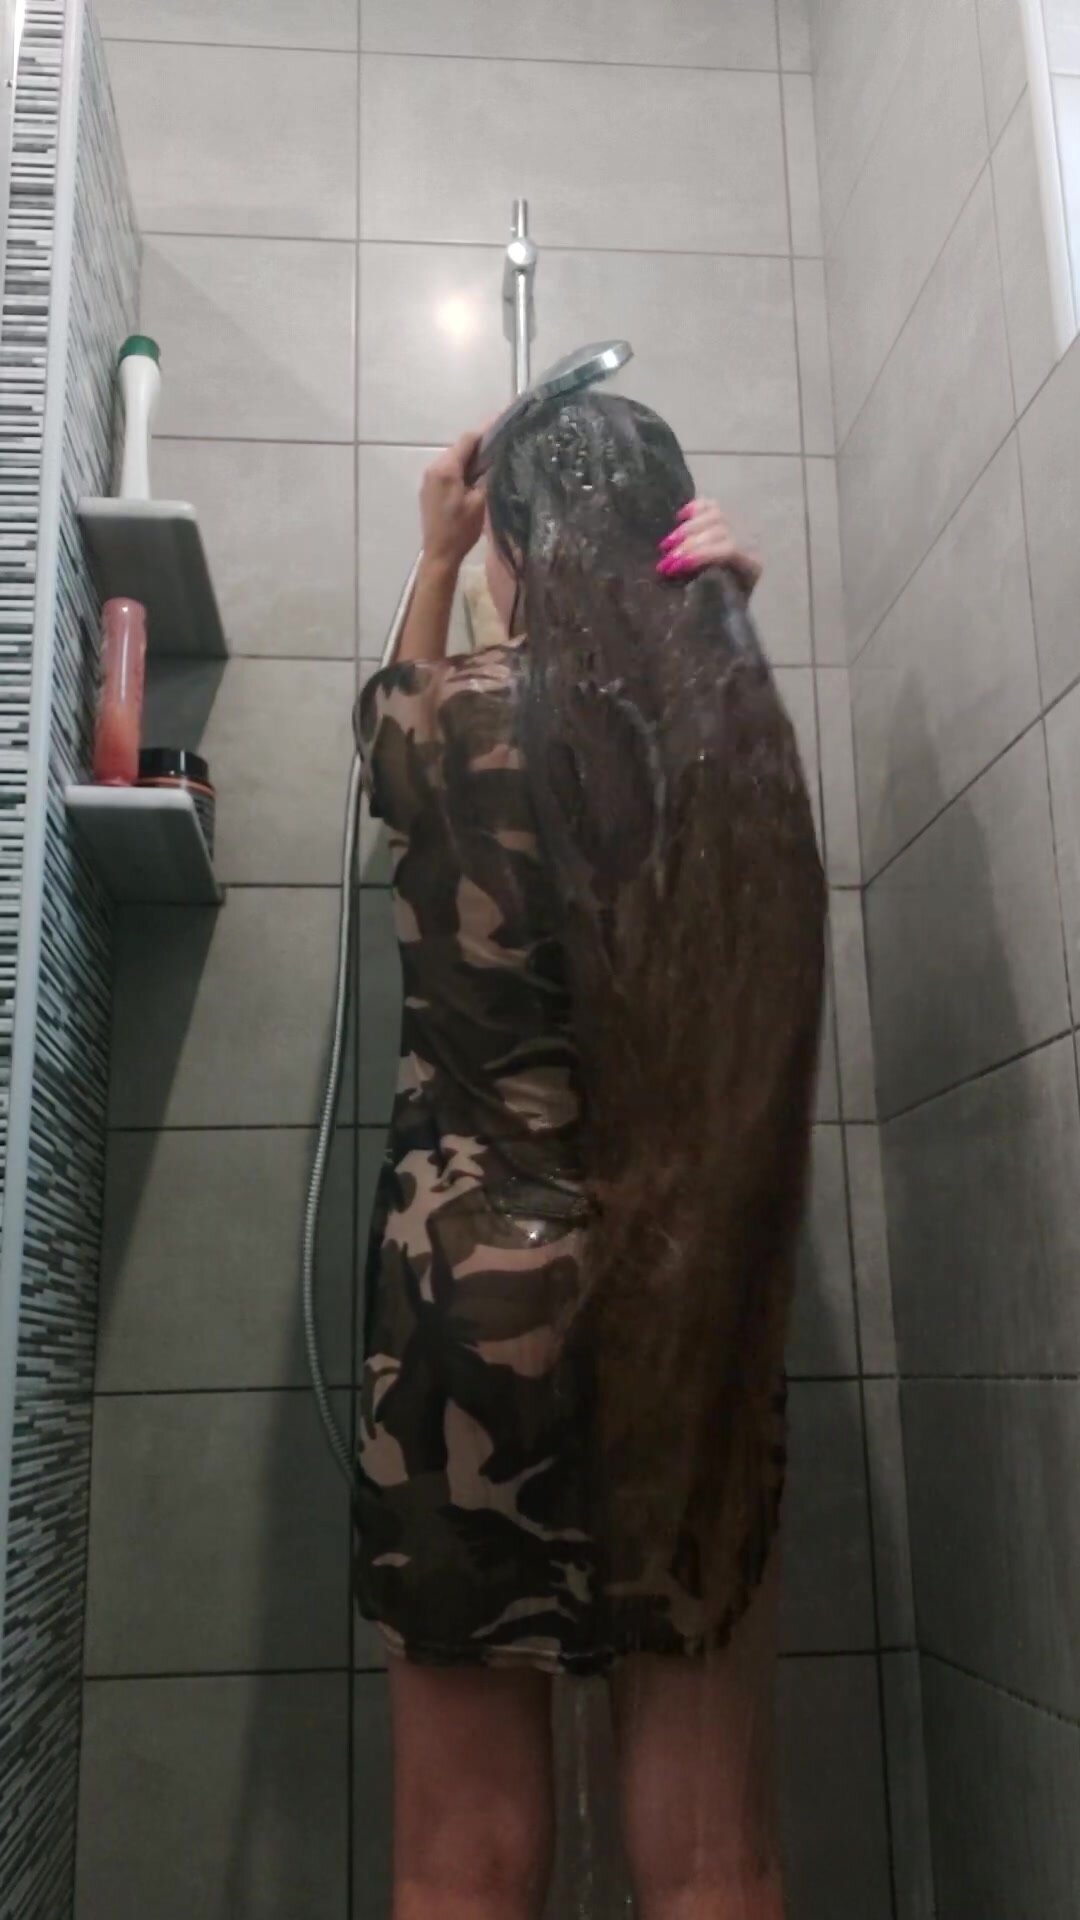 Wet long hair and clothes in the shower